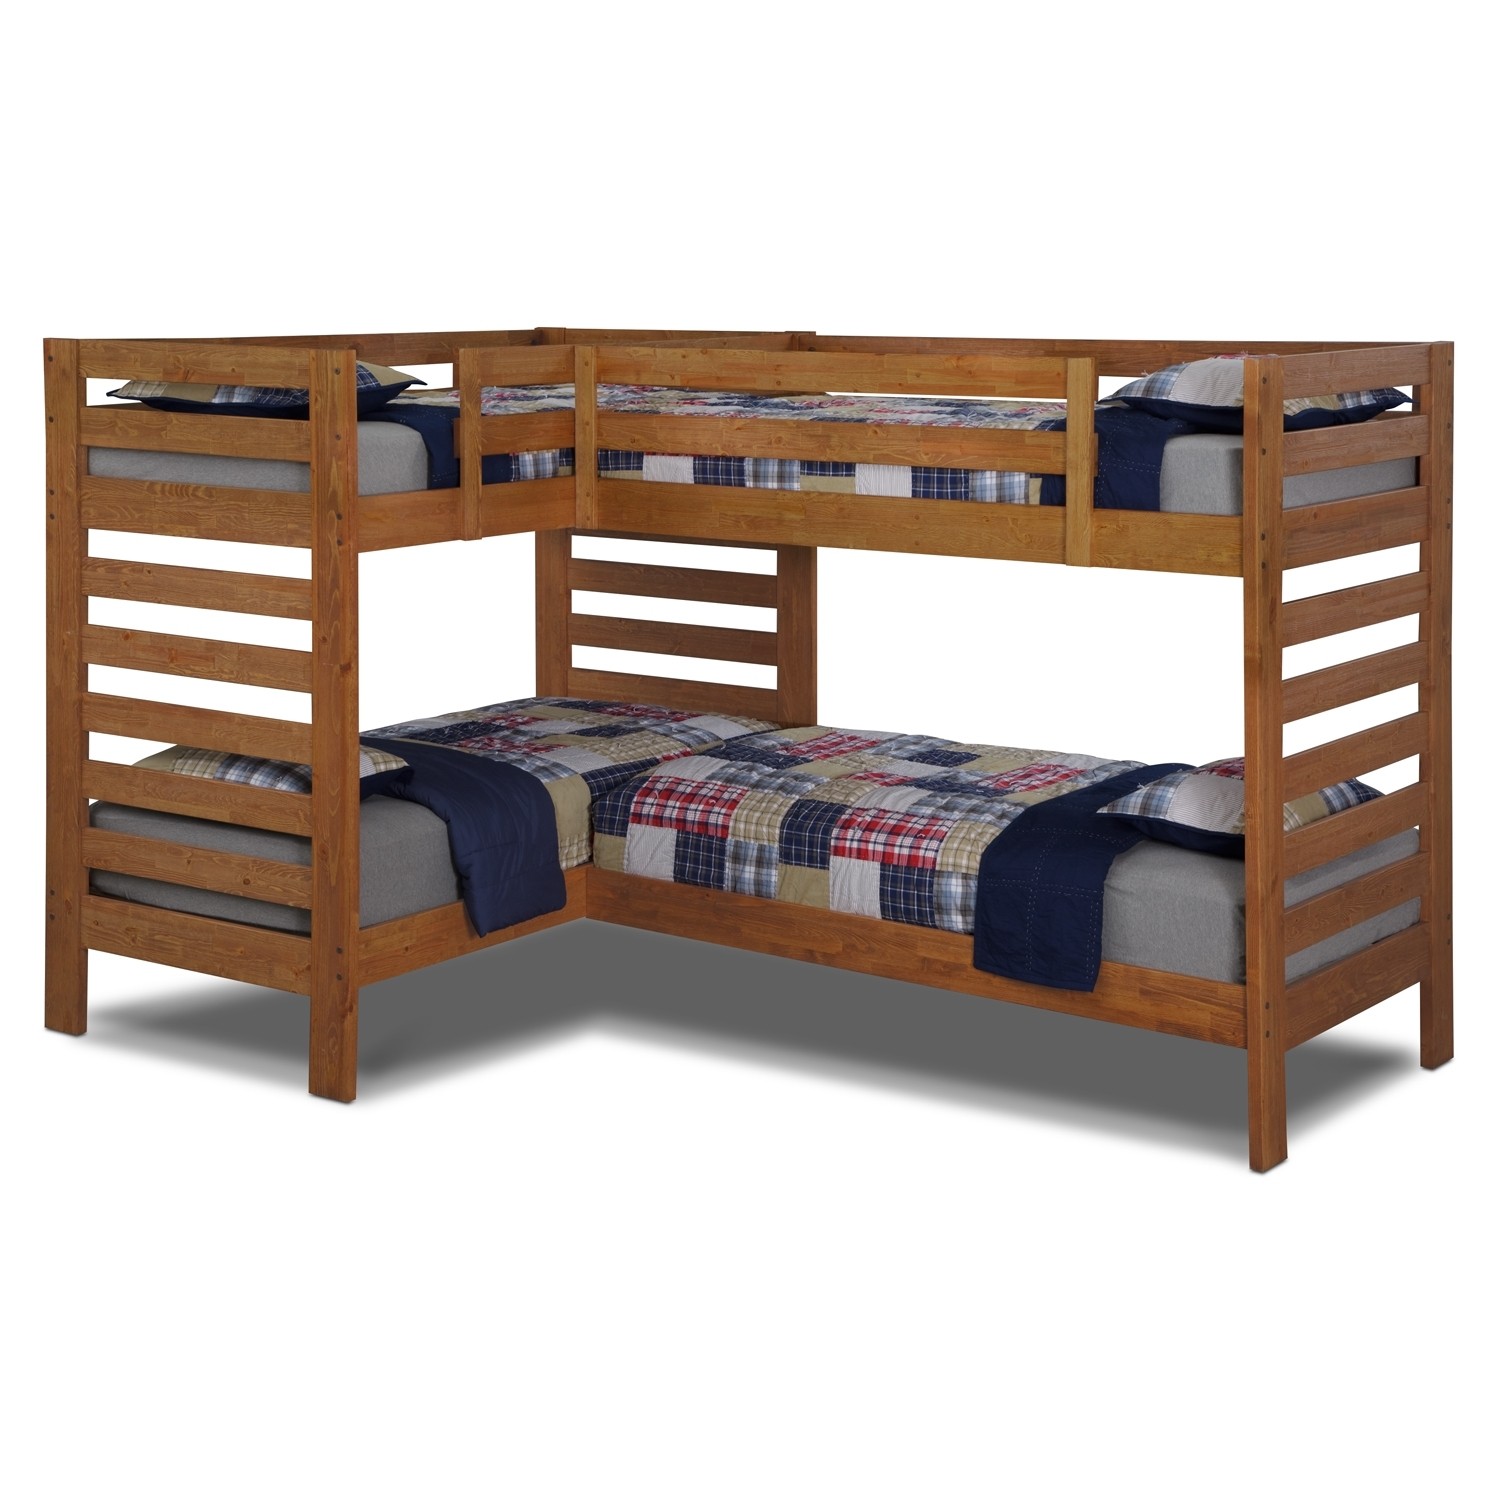 L shaped twin beds with corner table